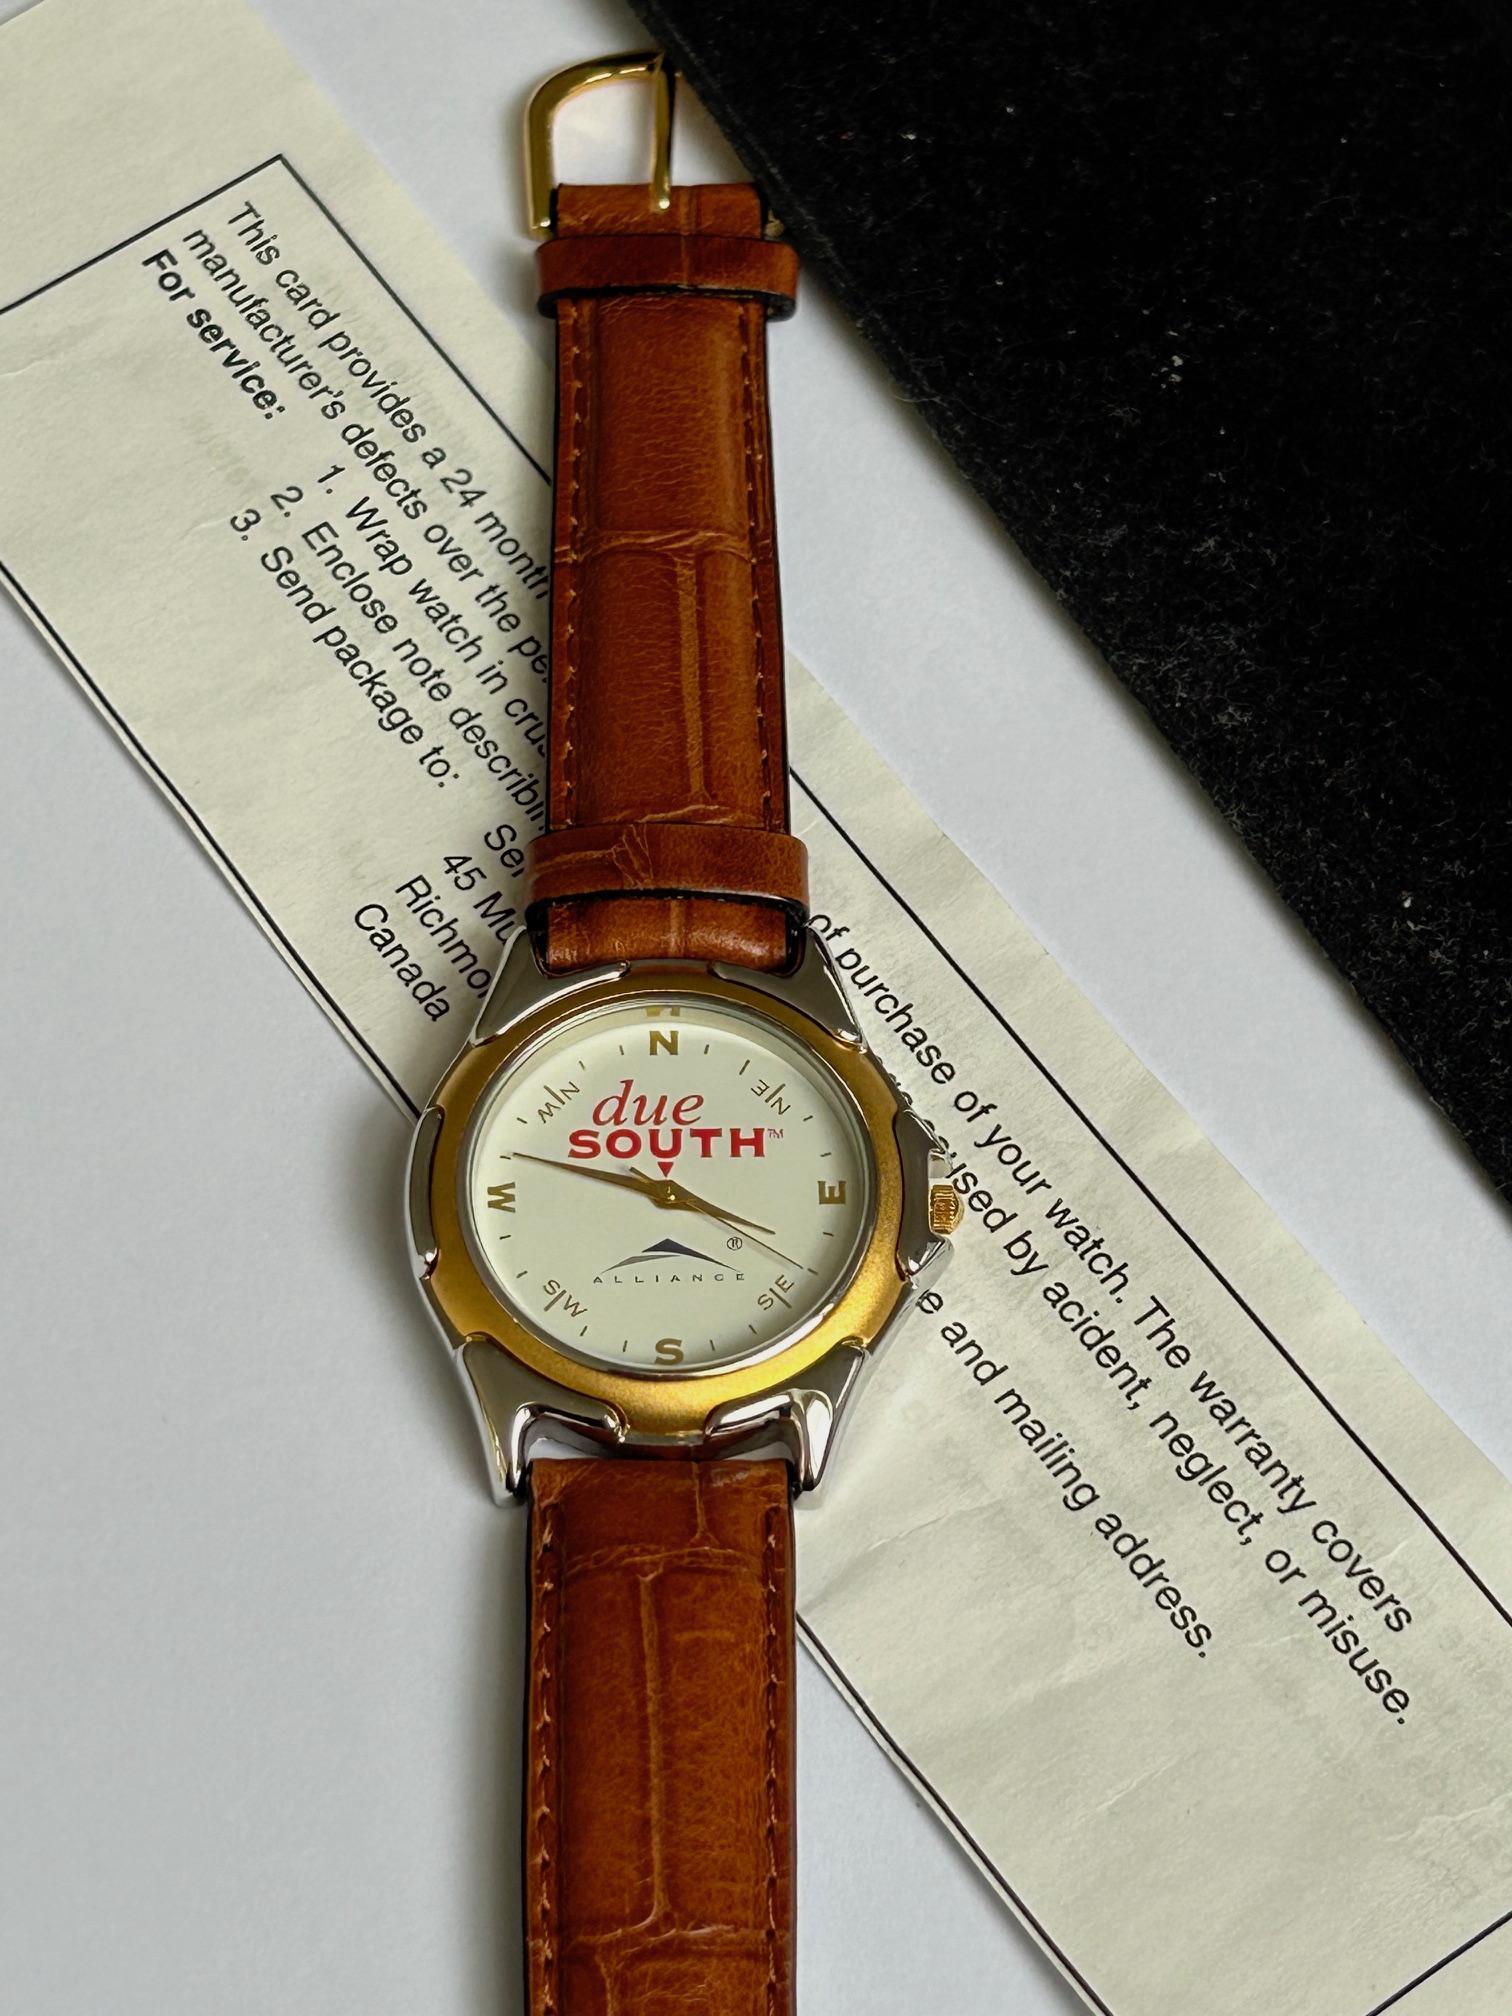 A very rare piece of TV memorabilia, this wristwatch was manufactured by ESP and commissioned for the Due South TV series features a stainless steel and gold tone case which measures 38 (exc crown) x 42mm (lug to lug) and is fitted to its original